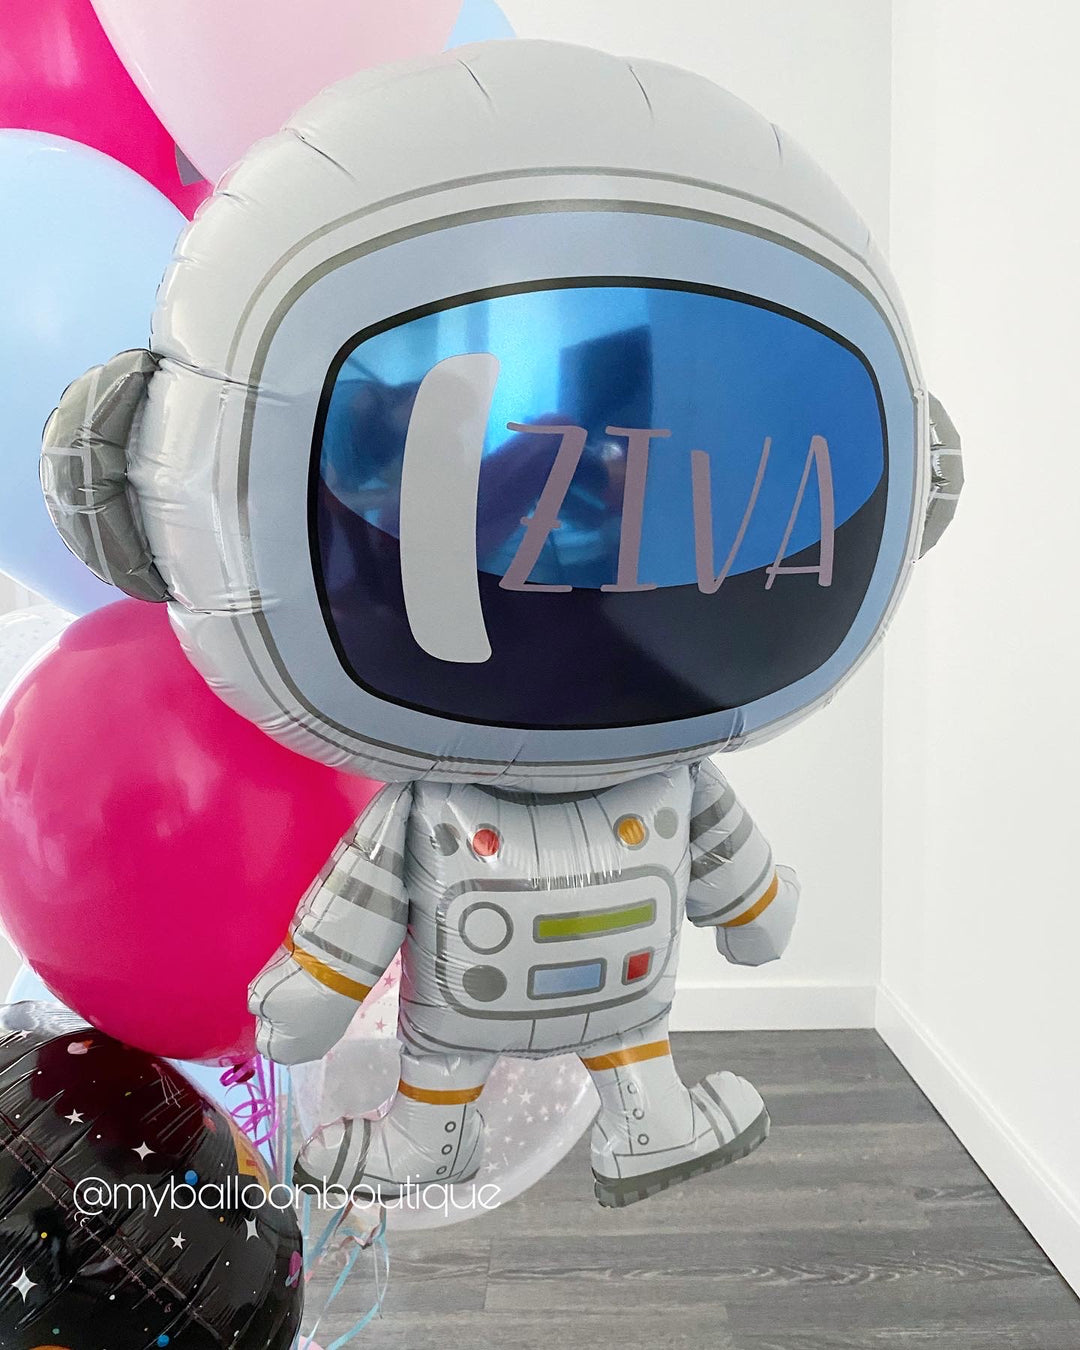 Astronaut balloon, customized with a name across the spacesuit visor